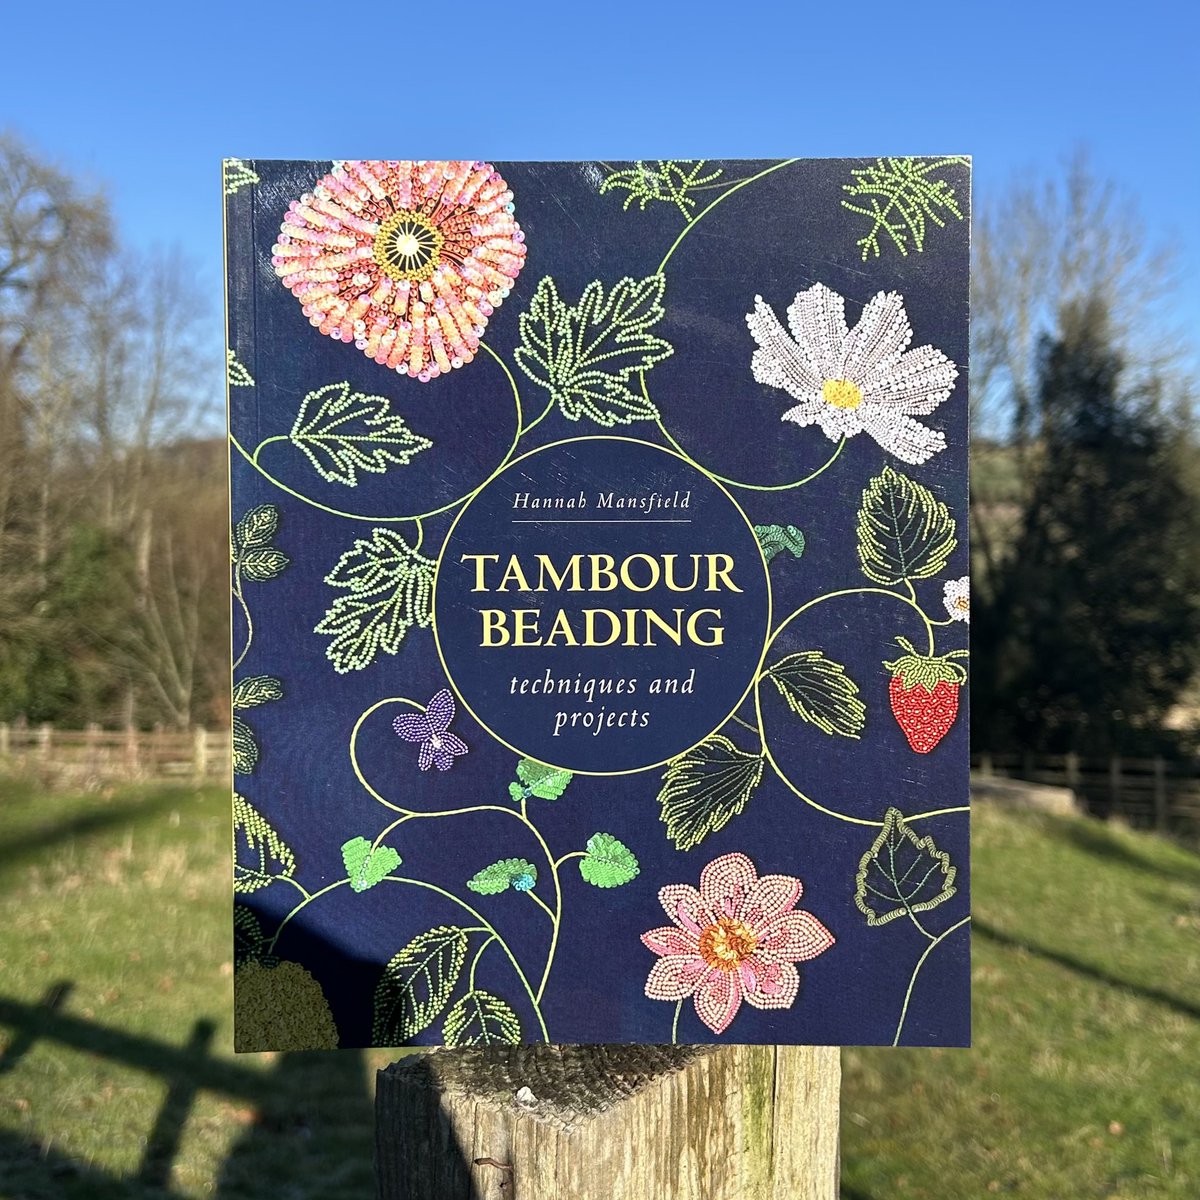 Congratulations to Hannah Mansfield on the publication of her new book, Tambour Beading. 🪡

With over one thousand sumptuous illustrations and clear thorough instructions, this practical book is an essential companion for beginners and experienced embroiderers. 

#crowood